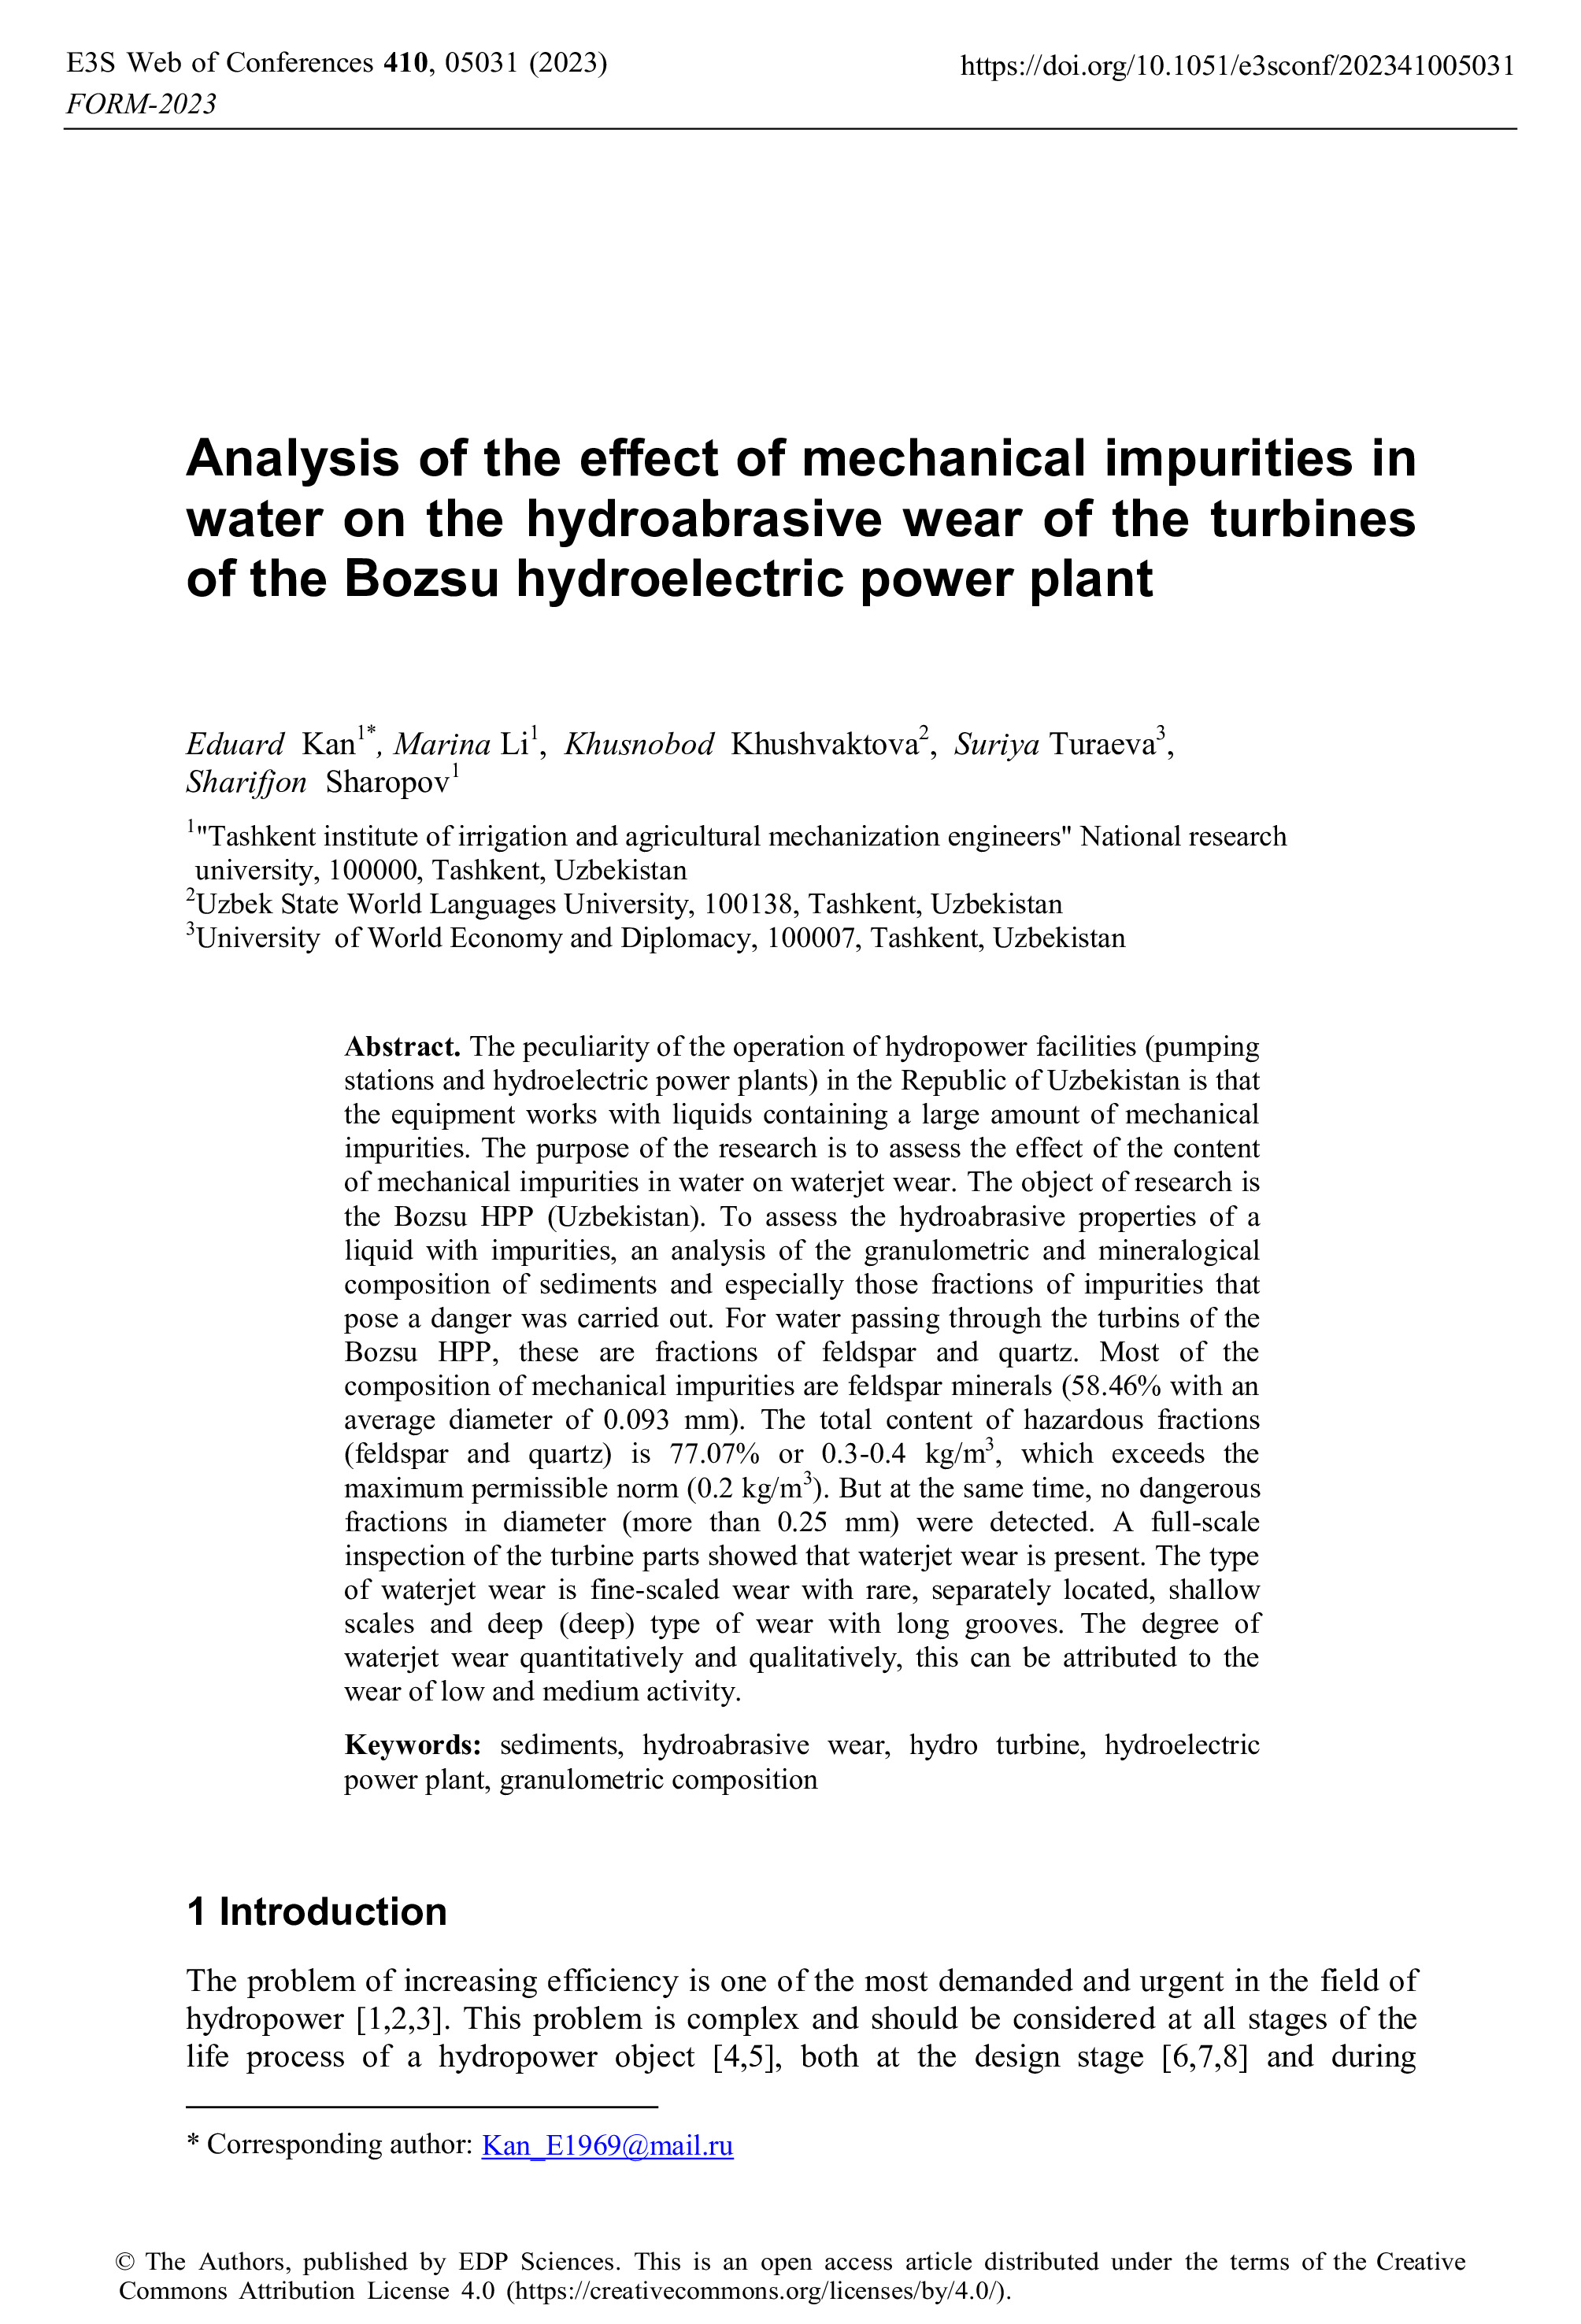 Analysis of the effect of mechanical impurities in water on the hydroabrasive wear of the turbines of the Bozsu hydroelectric power plant, 2023 | E.Kan, M.Li , K.Khushvaktova, S.Turaeva, S.Sharopov